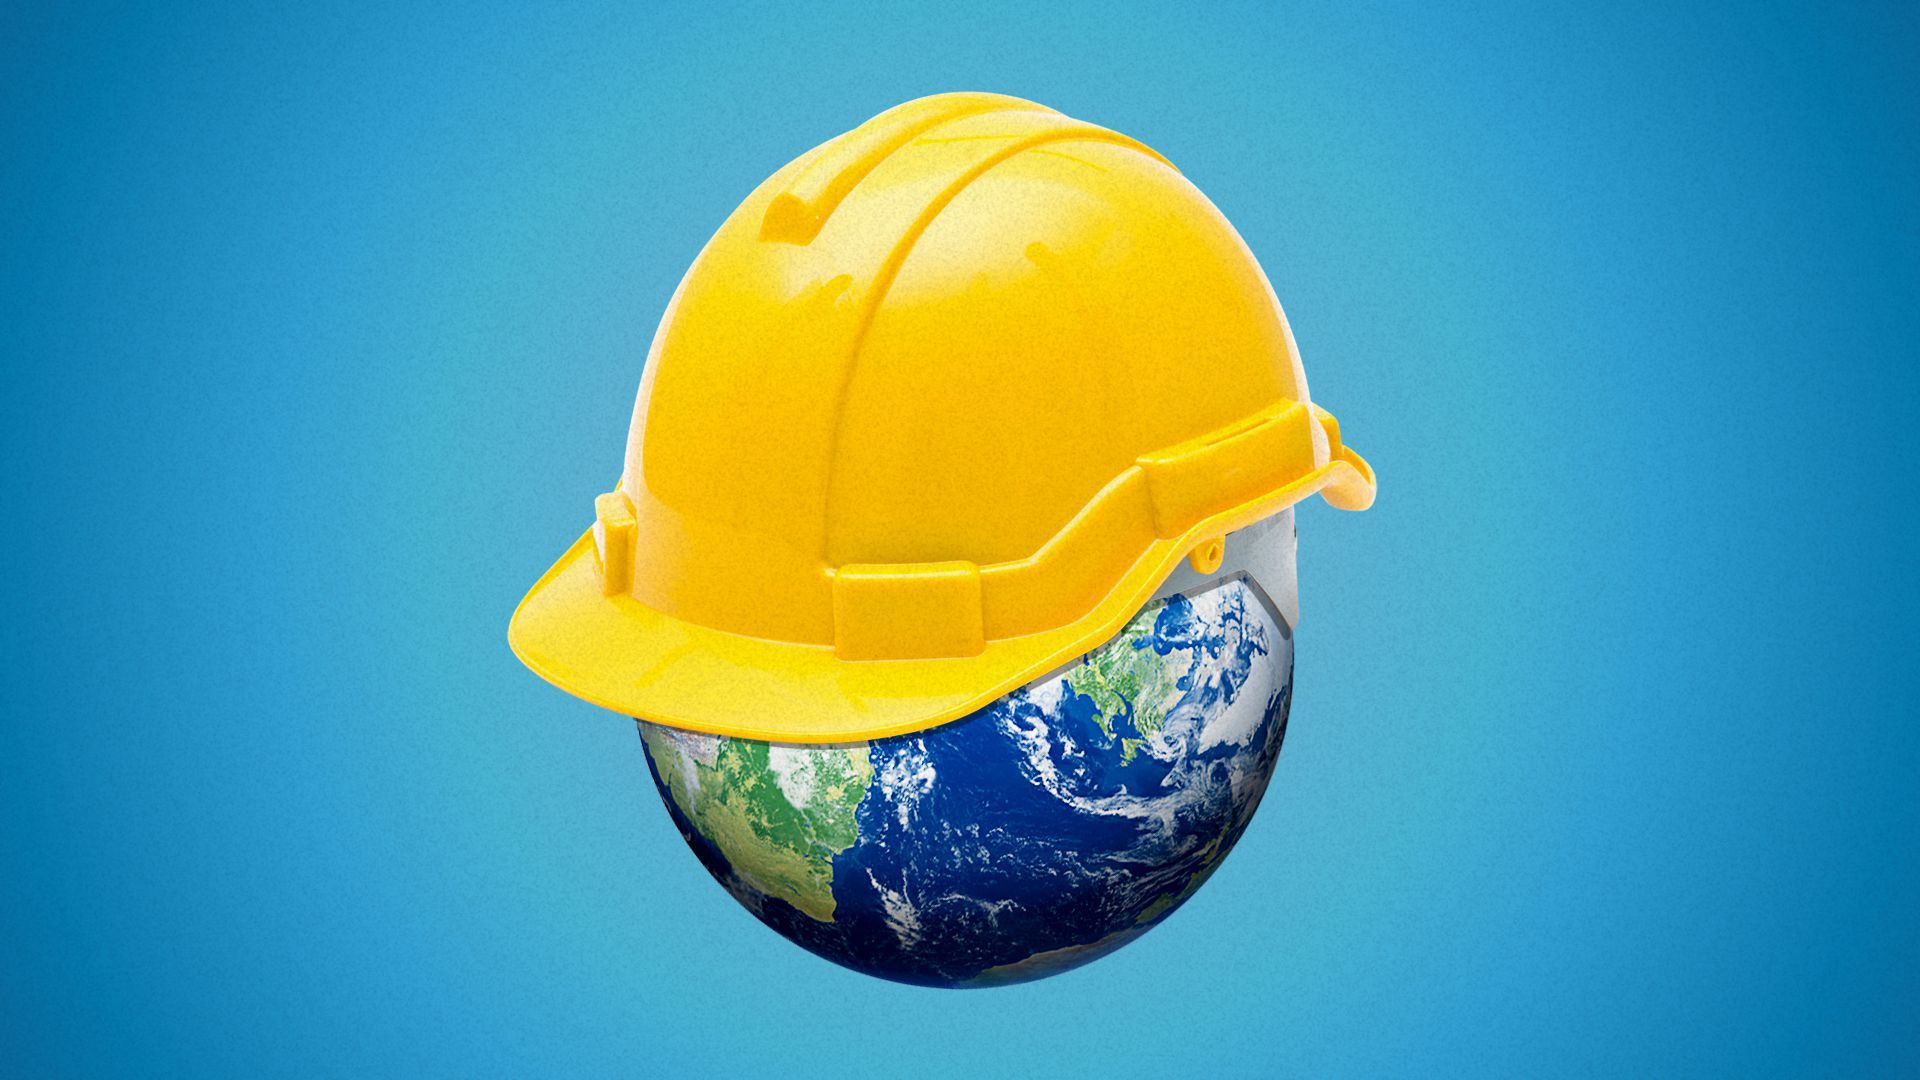 Illustration of the Earth with a hardhat on.